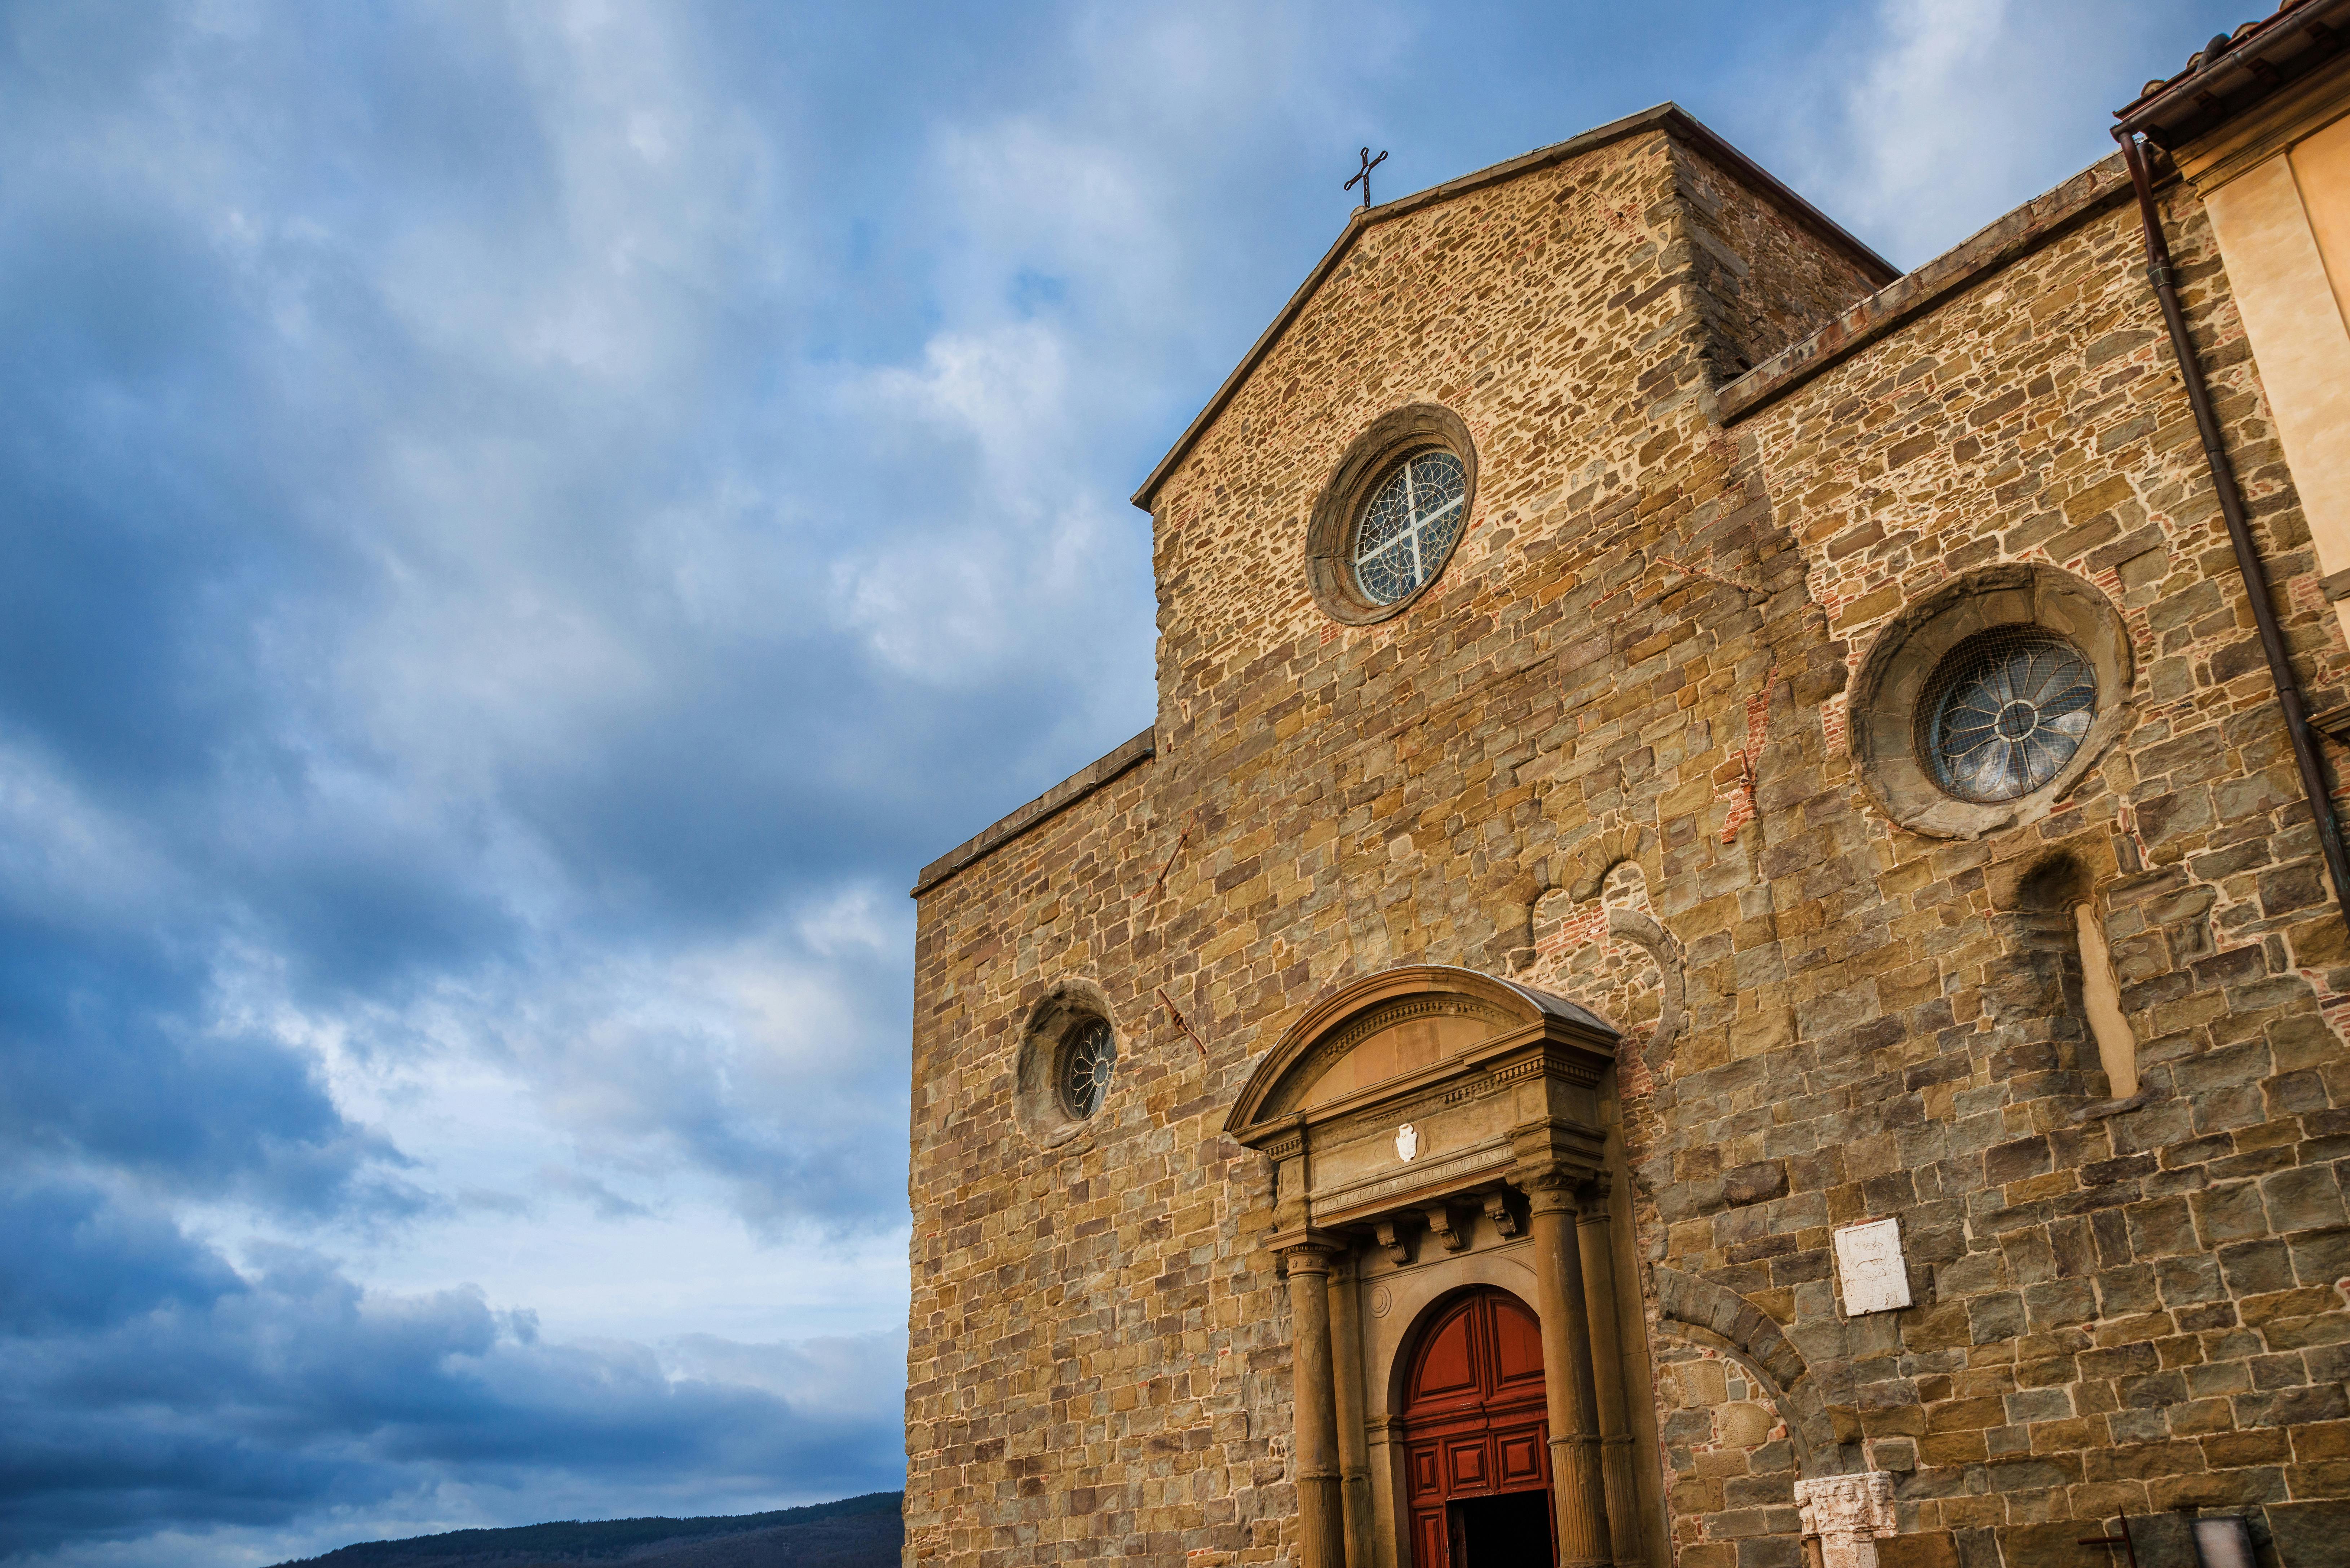 Tickets to the Diocesan Museum in Cortona